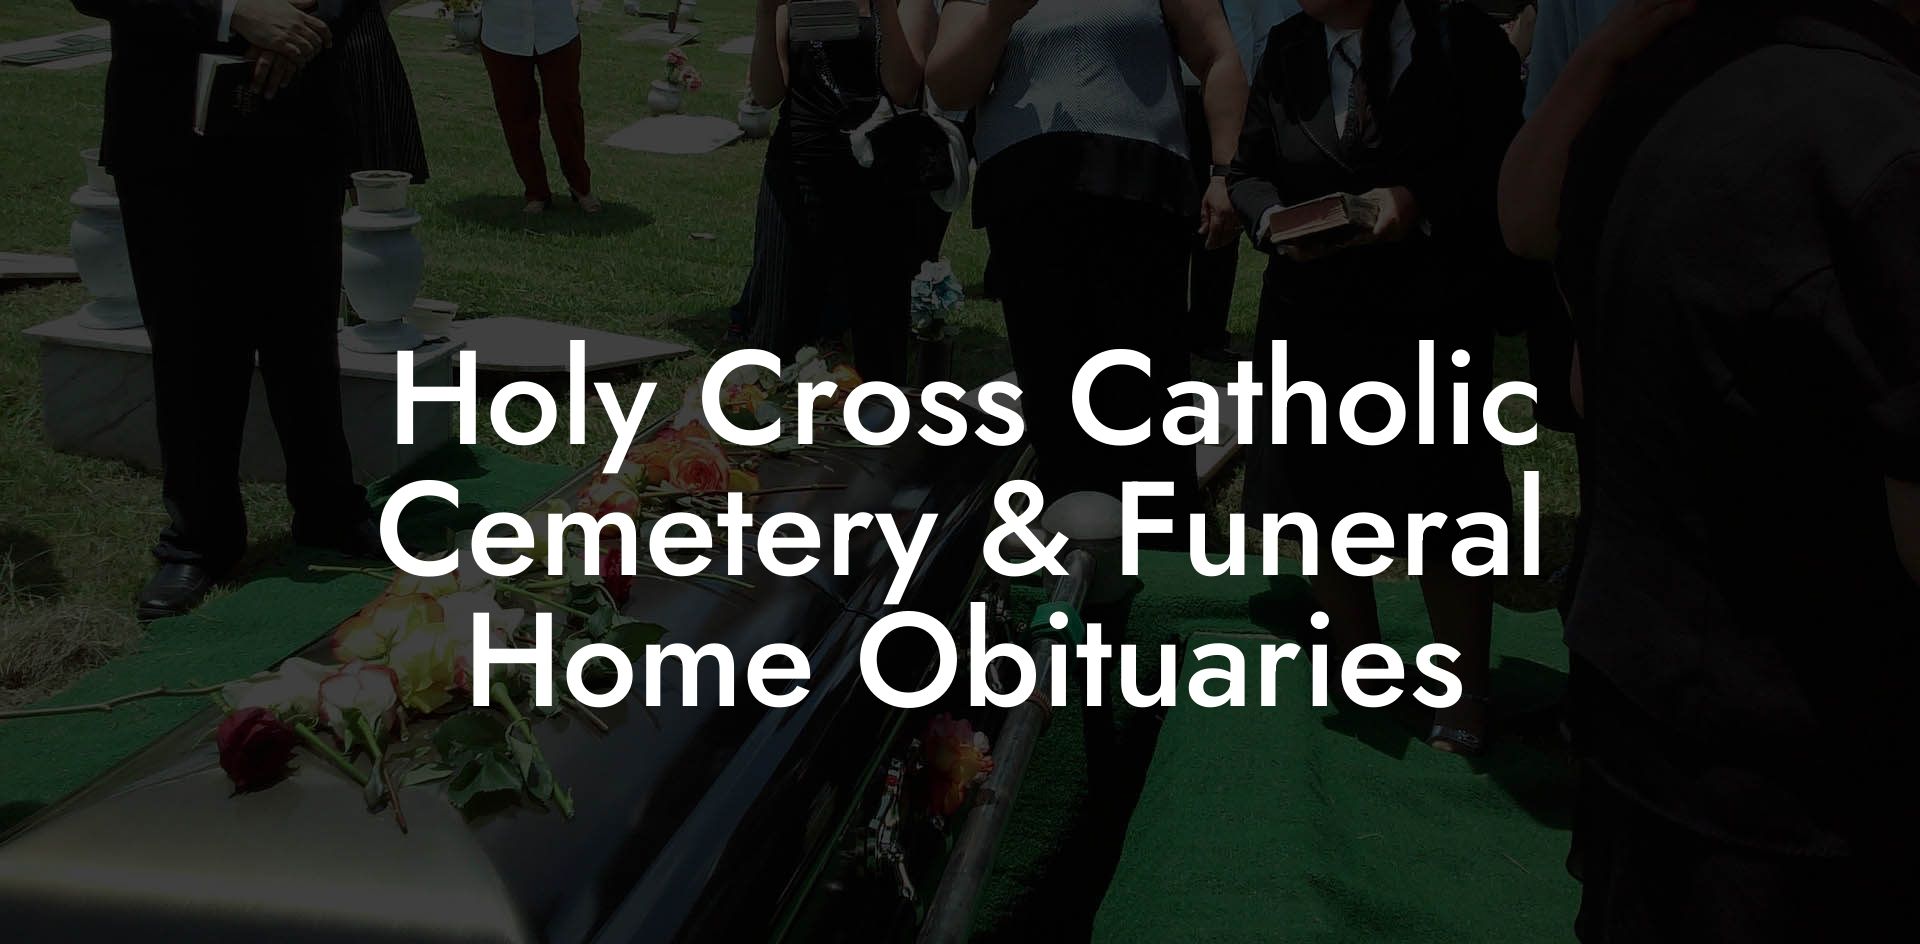 Holy Cross Catholic Cemetery & Funeral Home Obituaries